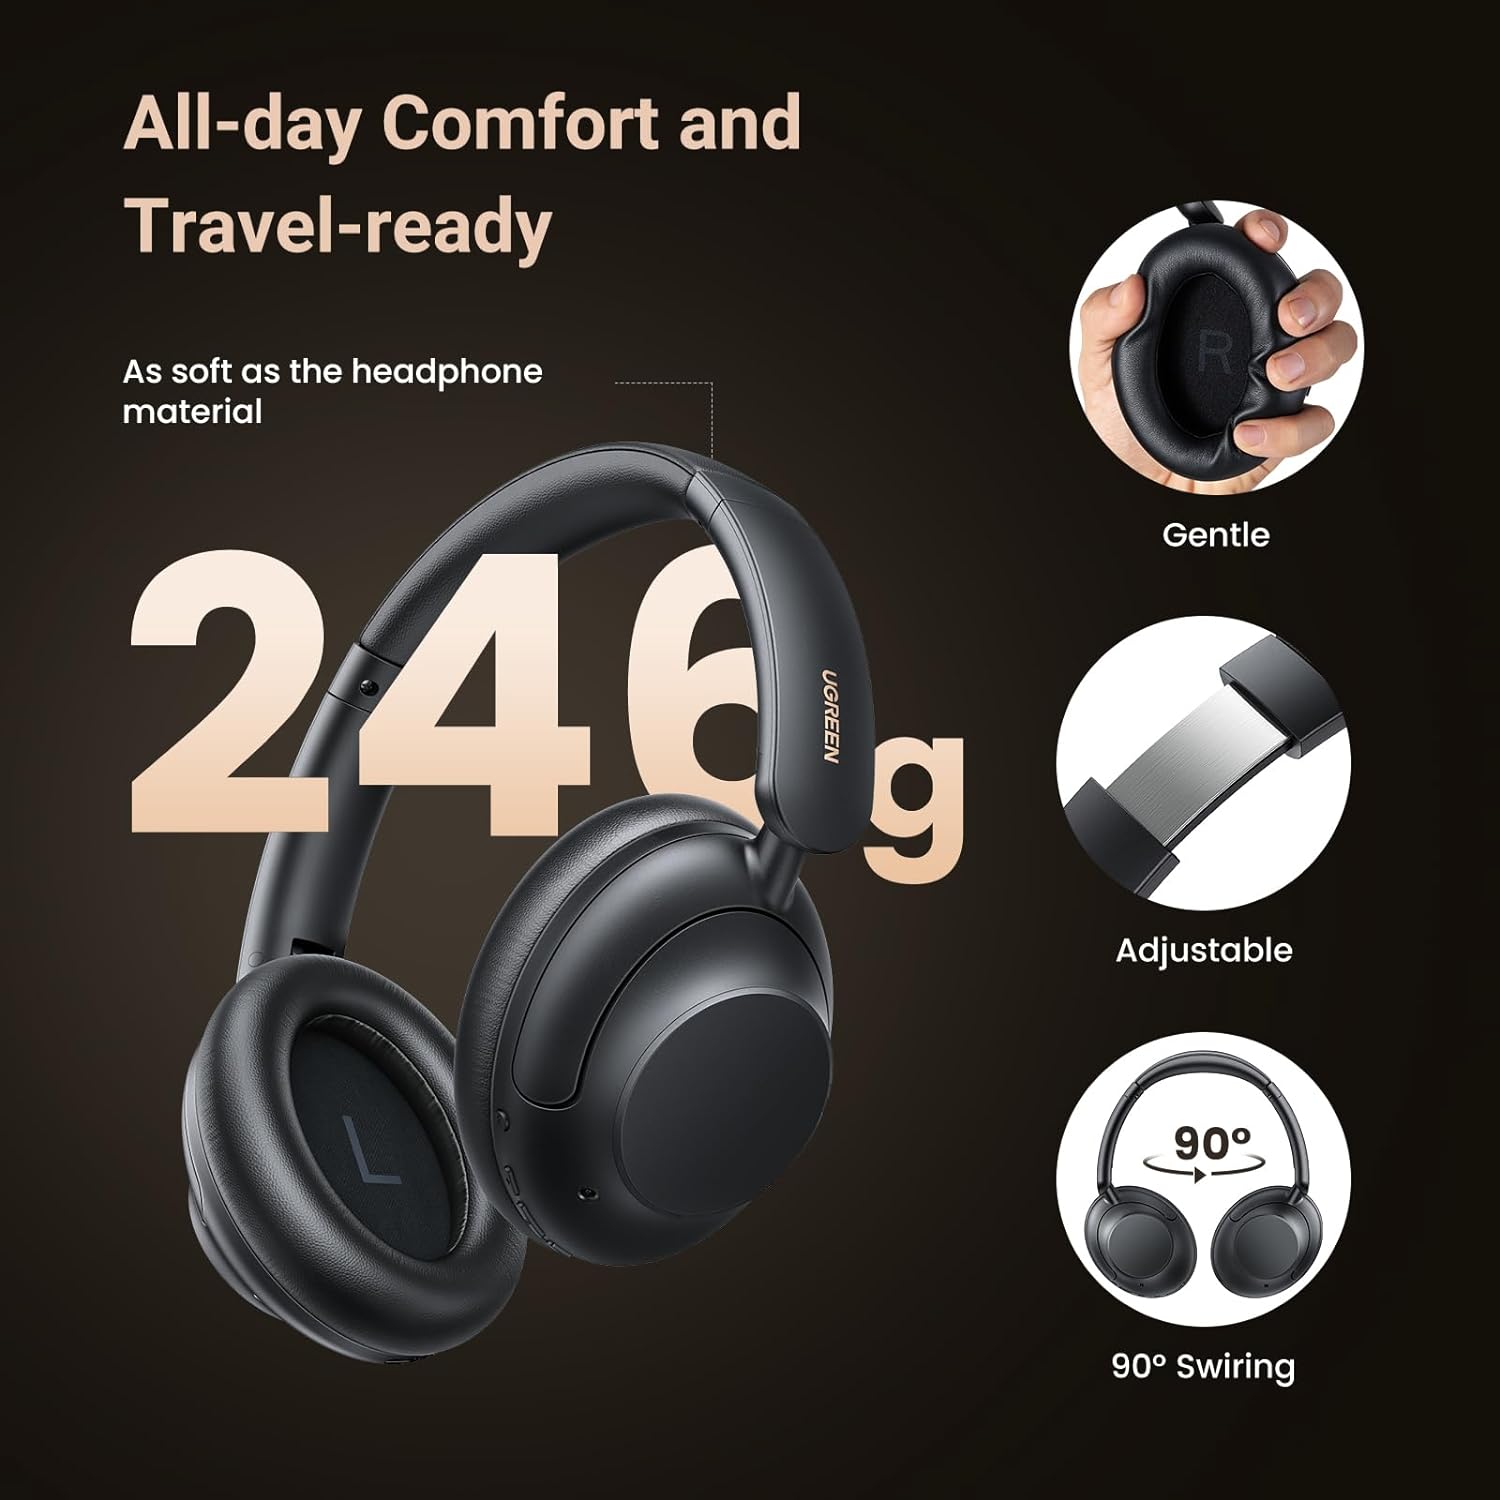 UGREEN Noise Cancelling Headphones Wireless Bluetooth 5.3 Headphone Over-Ear, 90 Hours Playtime Fast Charging Headsets, HiFi Stereo Hi-Res Deep Bass Lightweight Foldable Earbuds, Built-in Mic-Black